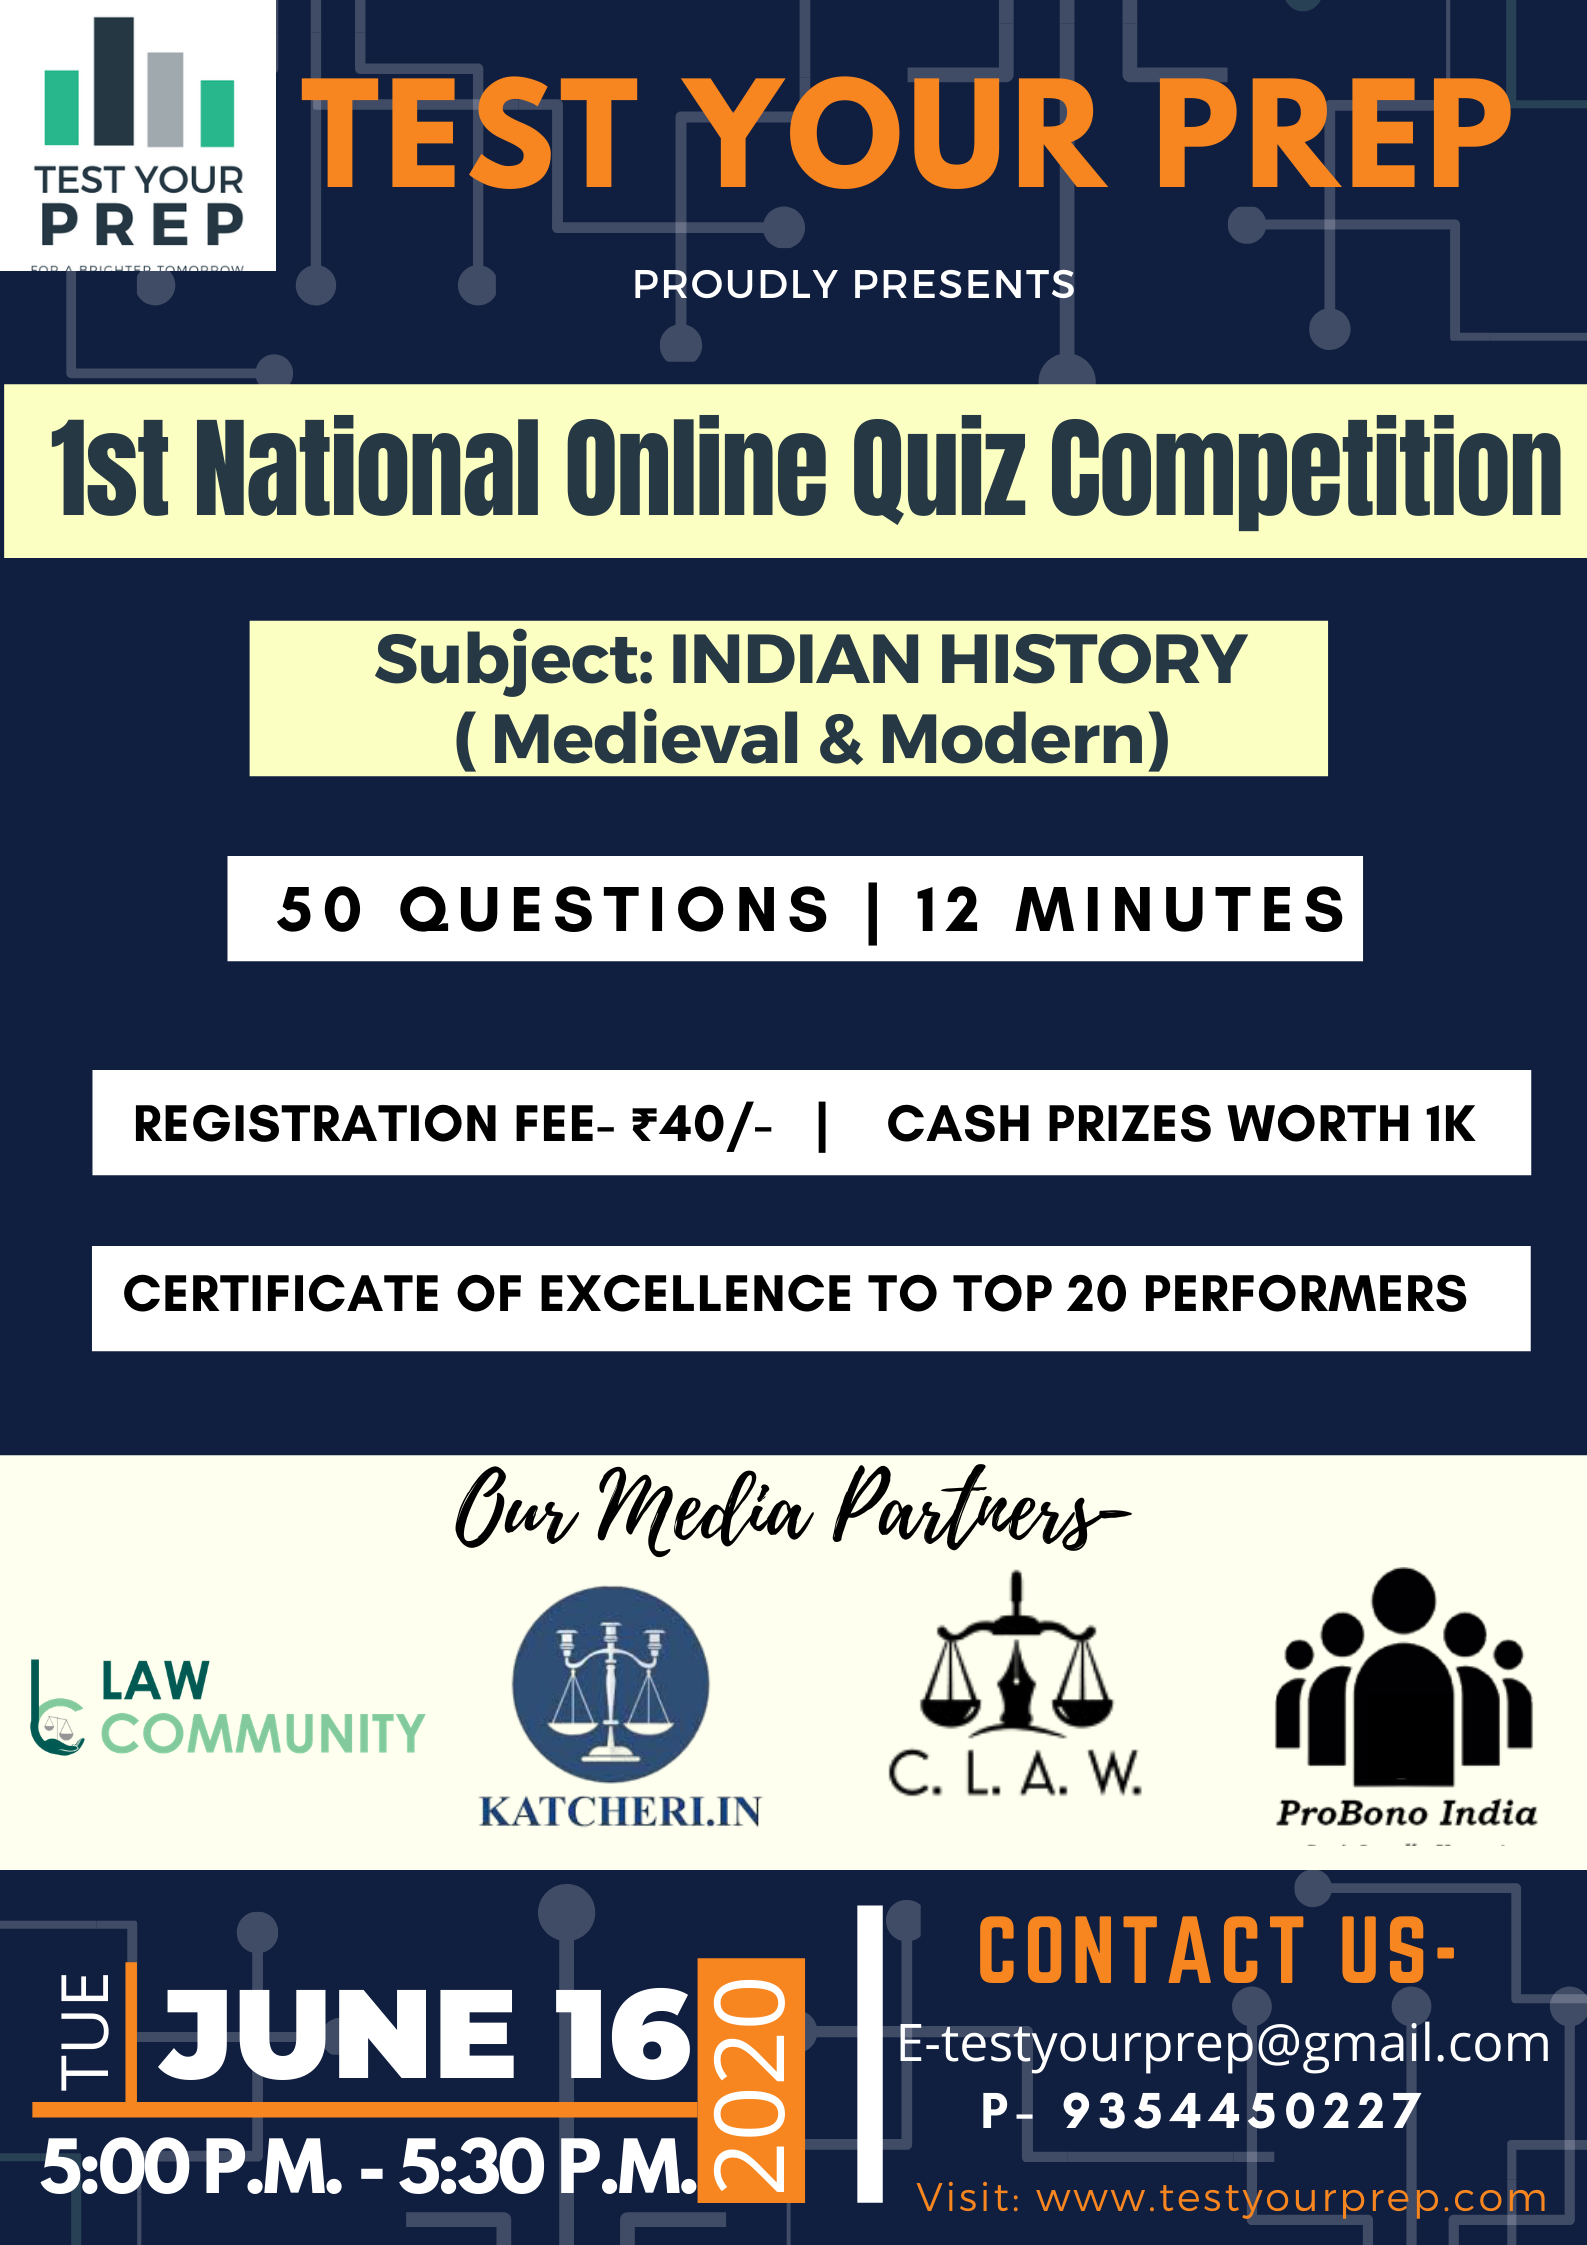 1ST NATIONAL ONLINE QUIZ COMPETITION BY TEST YOUR PREP: REGISTRATIONS OPEN